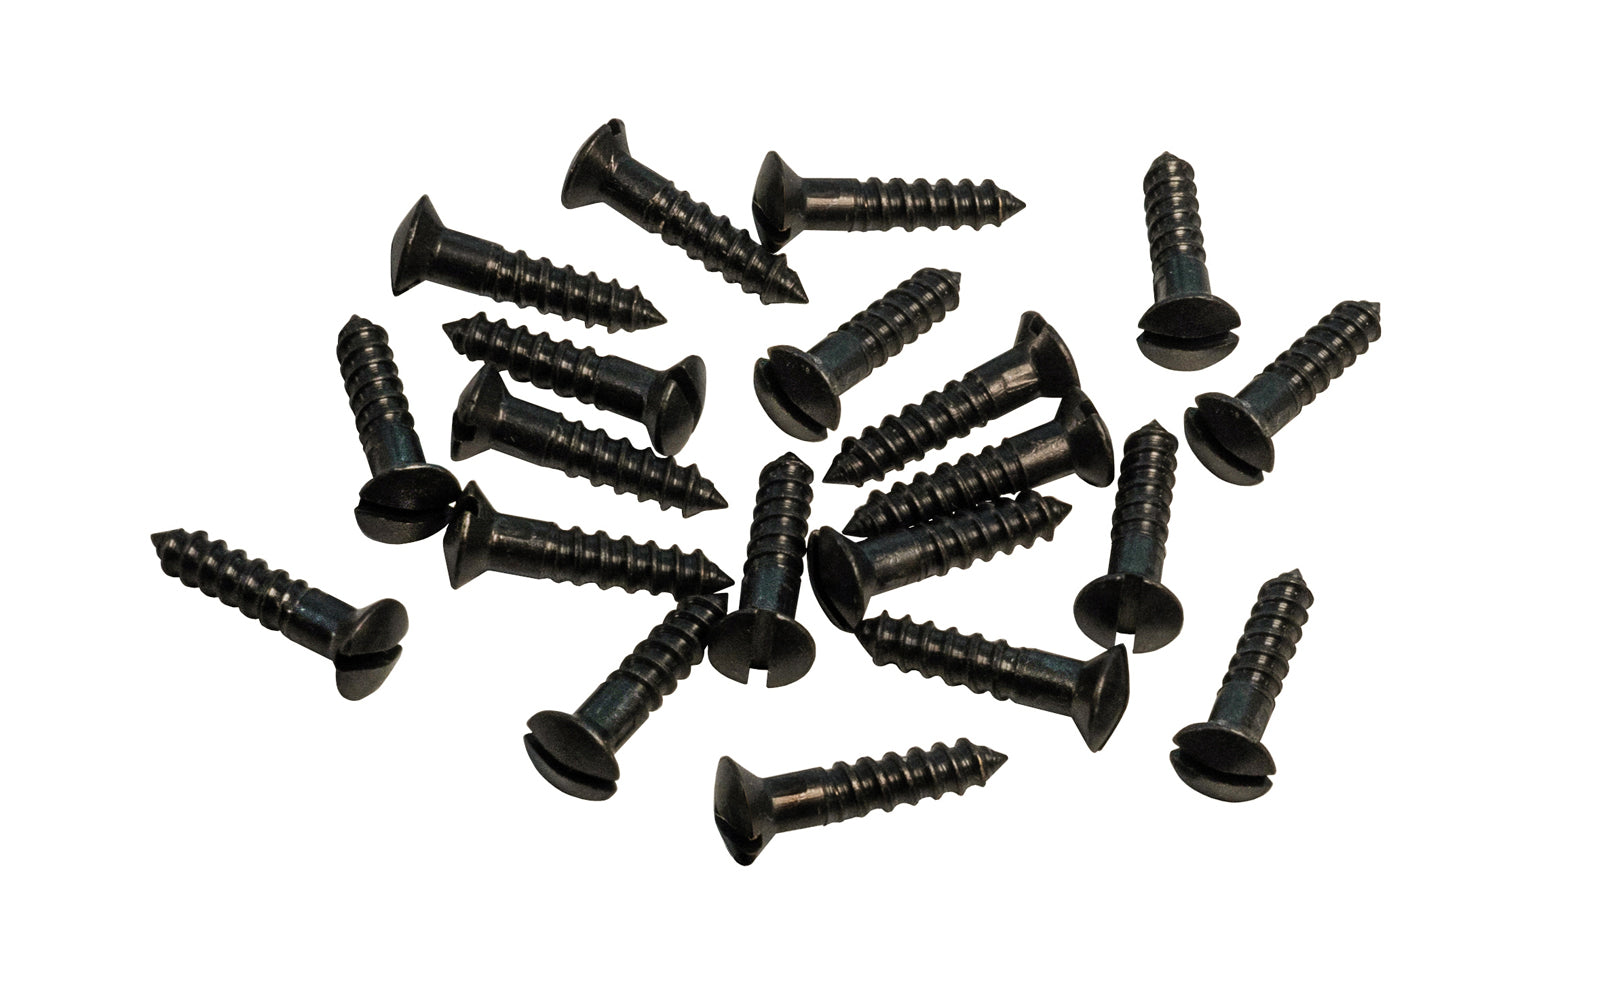 Solid Brass #5 x 5/8" Oval Head Slotted Wood Screws. Traditional & classic vintage-style countersunk wood screws. Sold as 20 pieces in a bag. Oil rubbed bronze finish